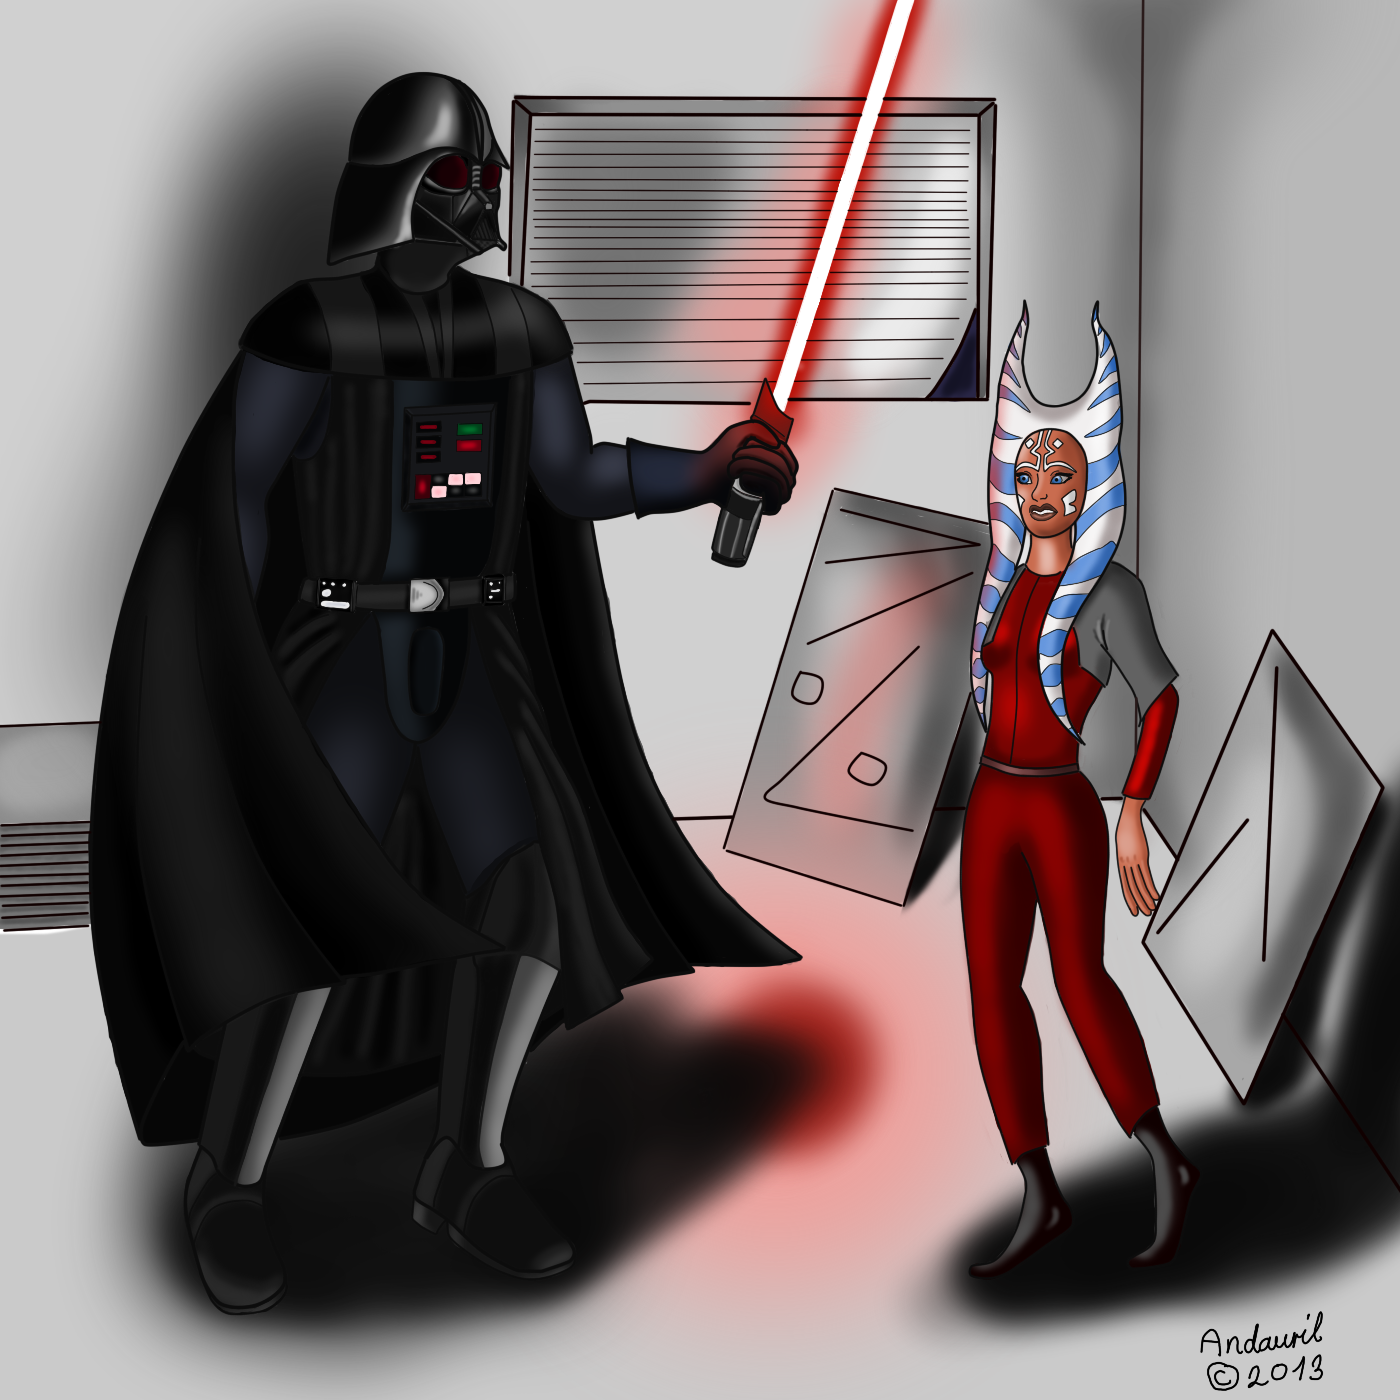 __unexpected_reunion___by_andauril-d61yc7s.png